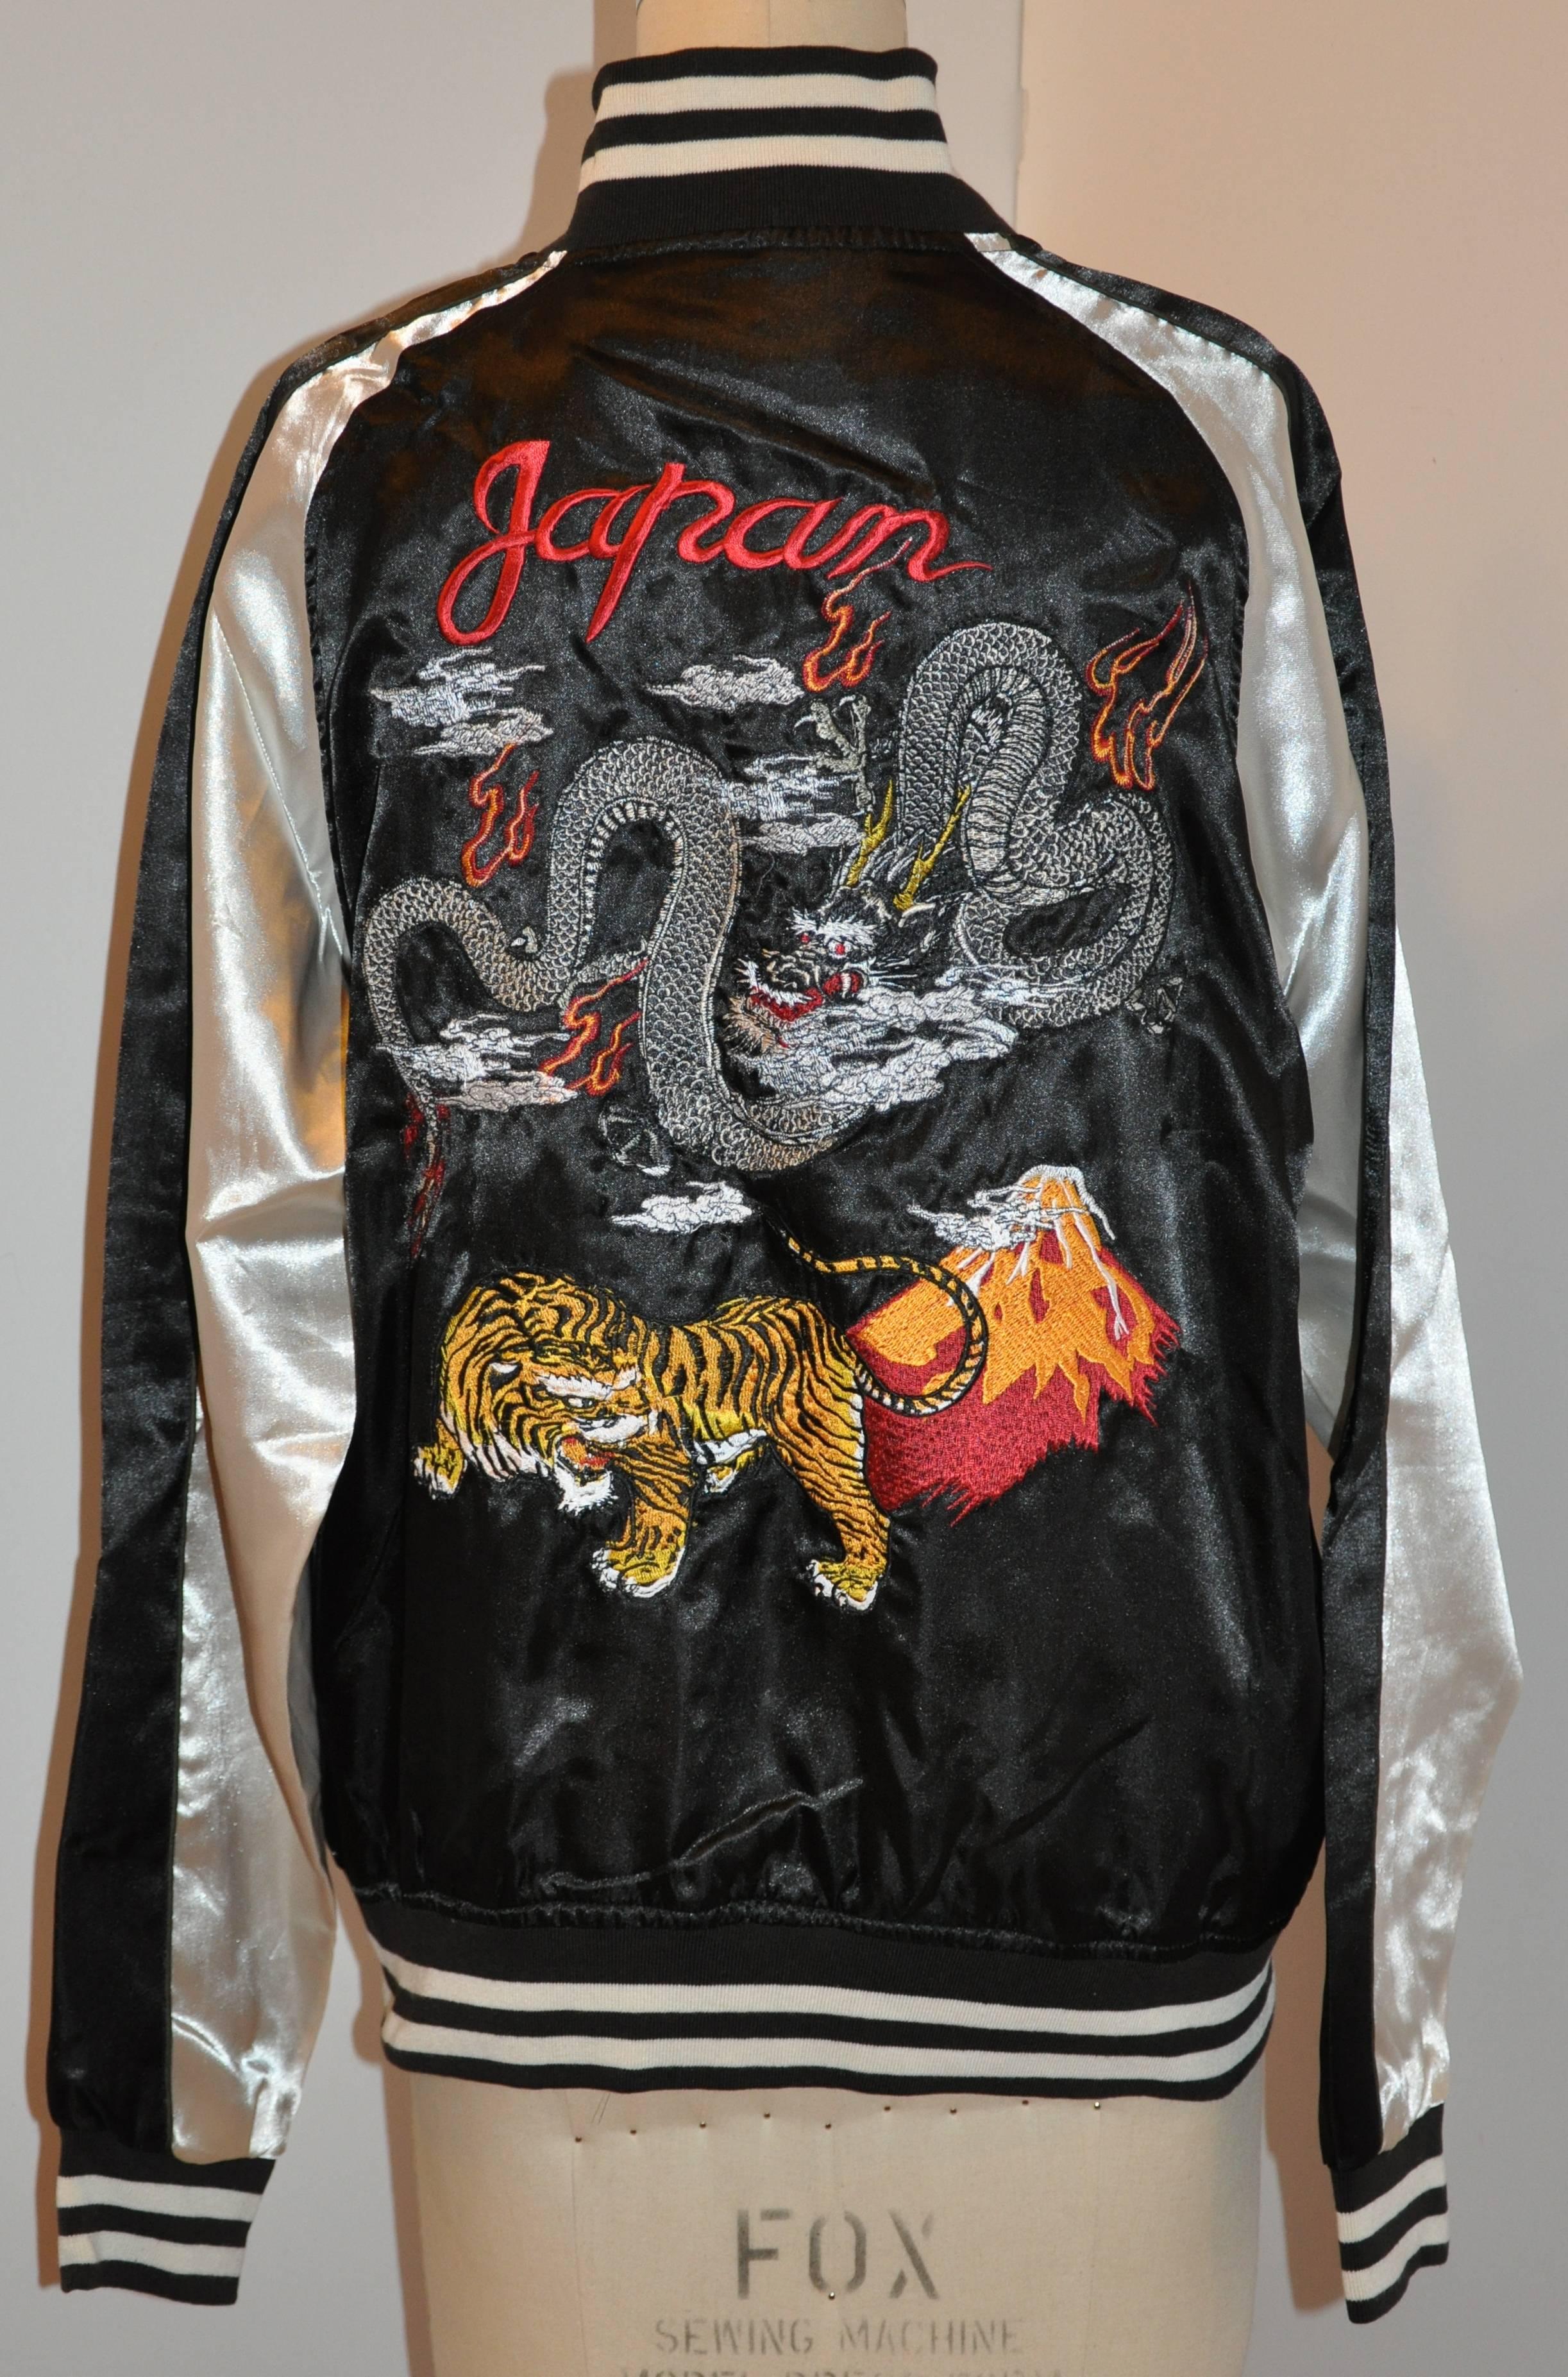        This wonderful Japanese ivory and black fully lined zippered bomber-style jacket is embroidered with Dragons and a tiger, finished with the words "Japan" in back. The collar as well as the hem is accented with a three-inch stripe